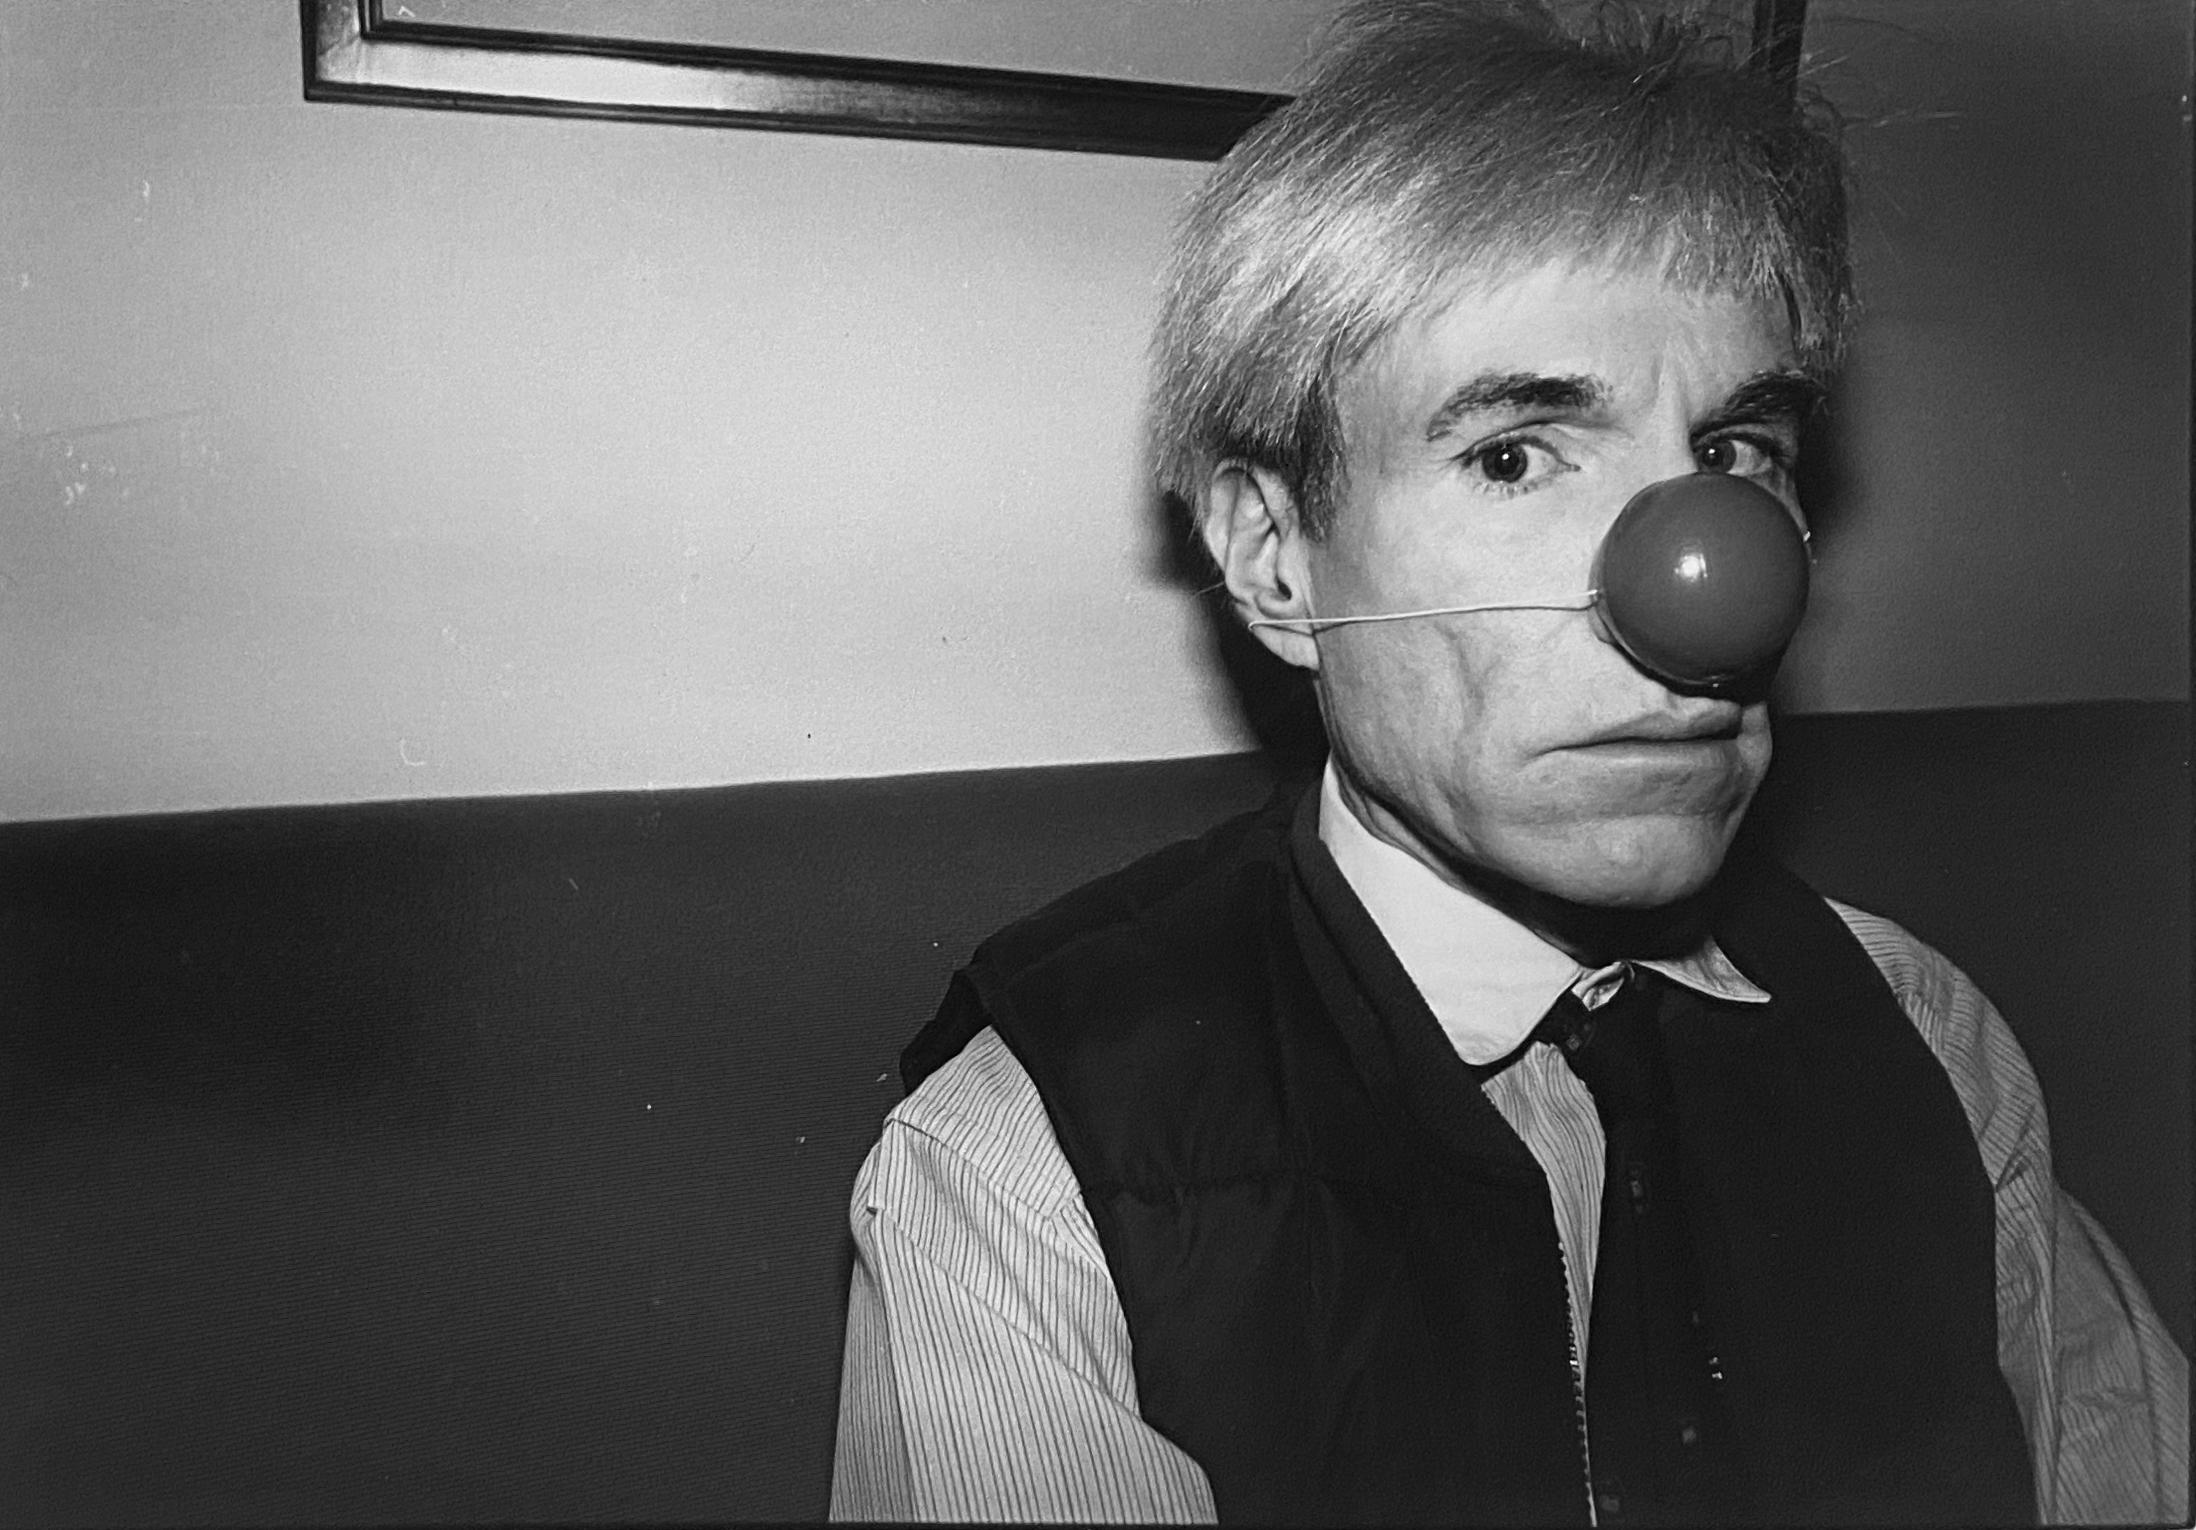 Andy Warhol with Clown Nose